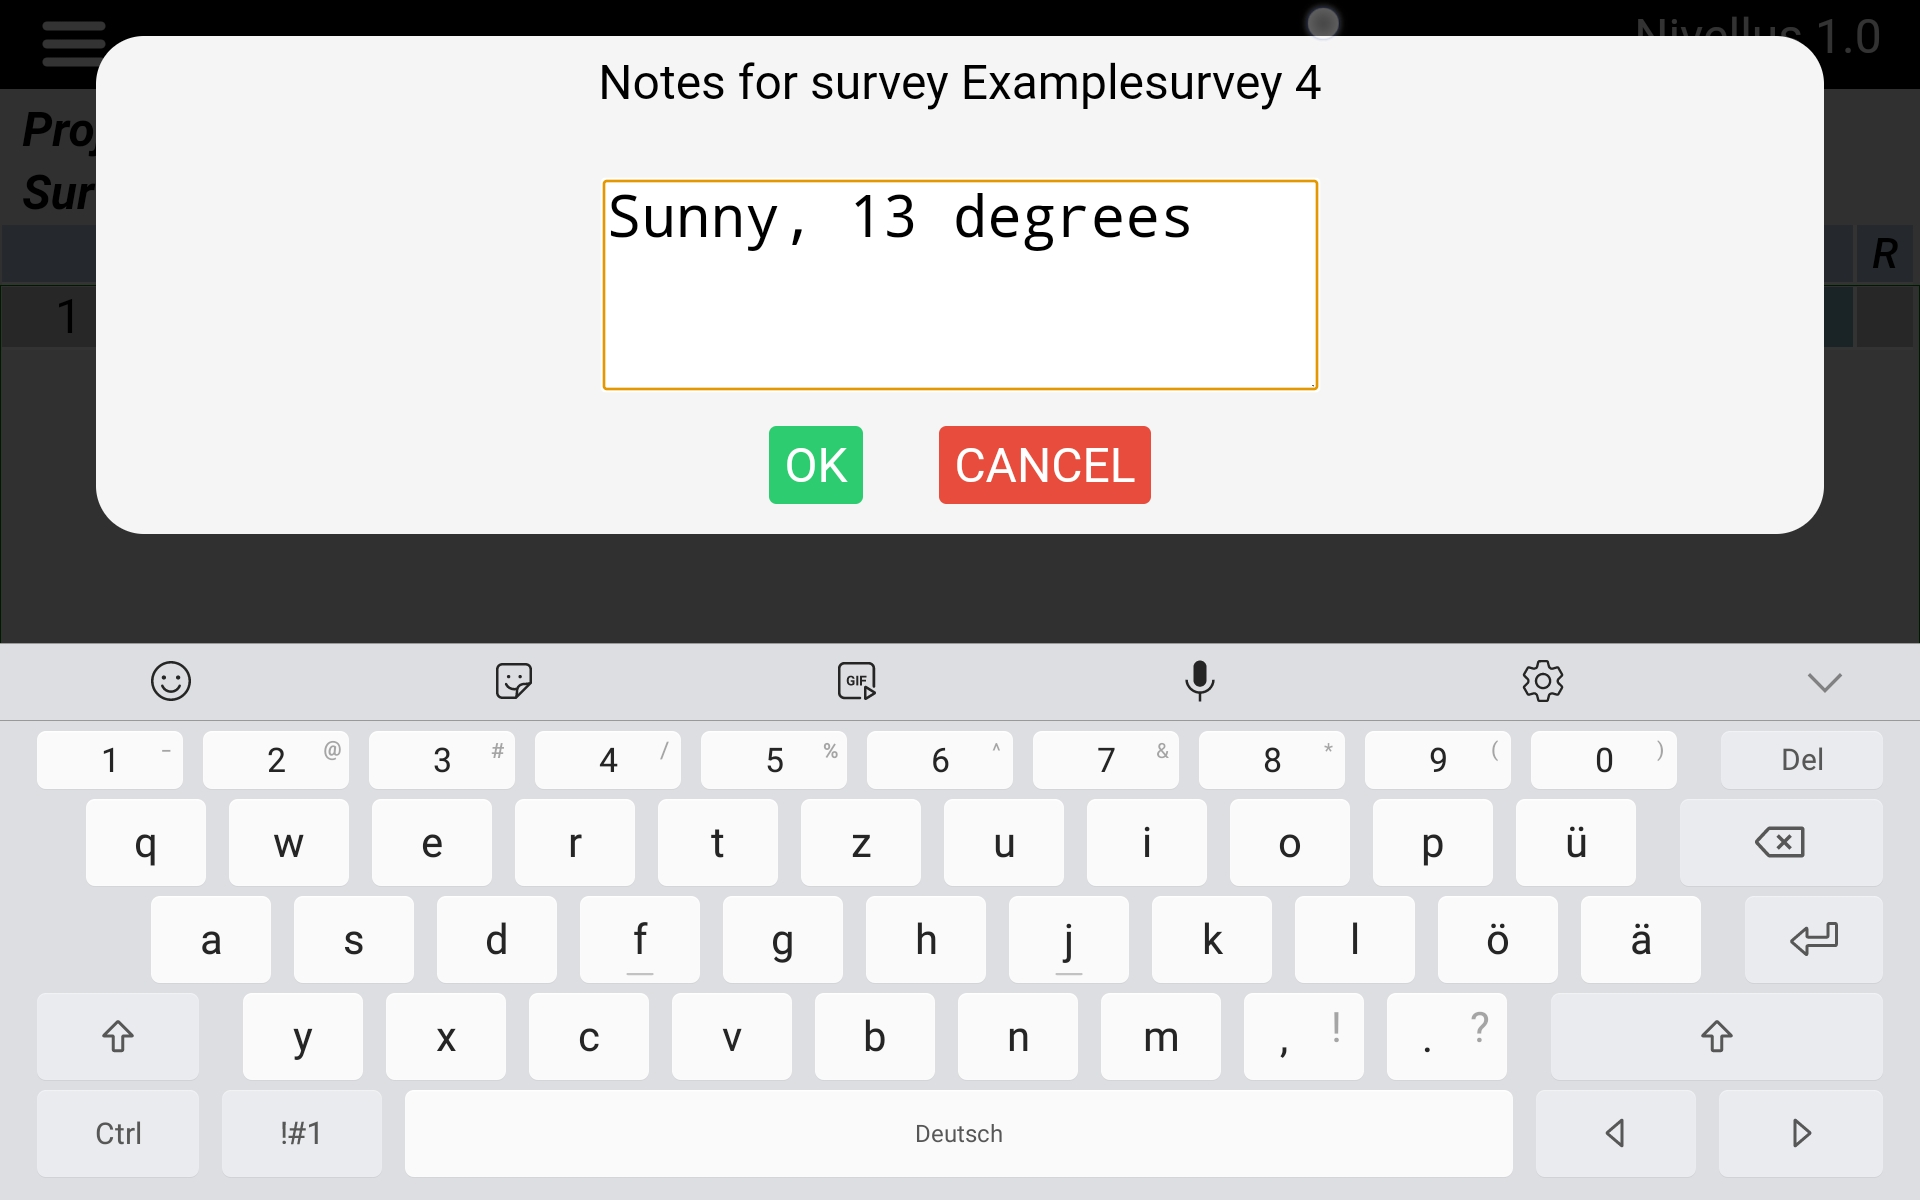 Input notes for example survey